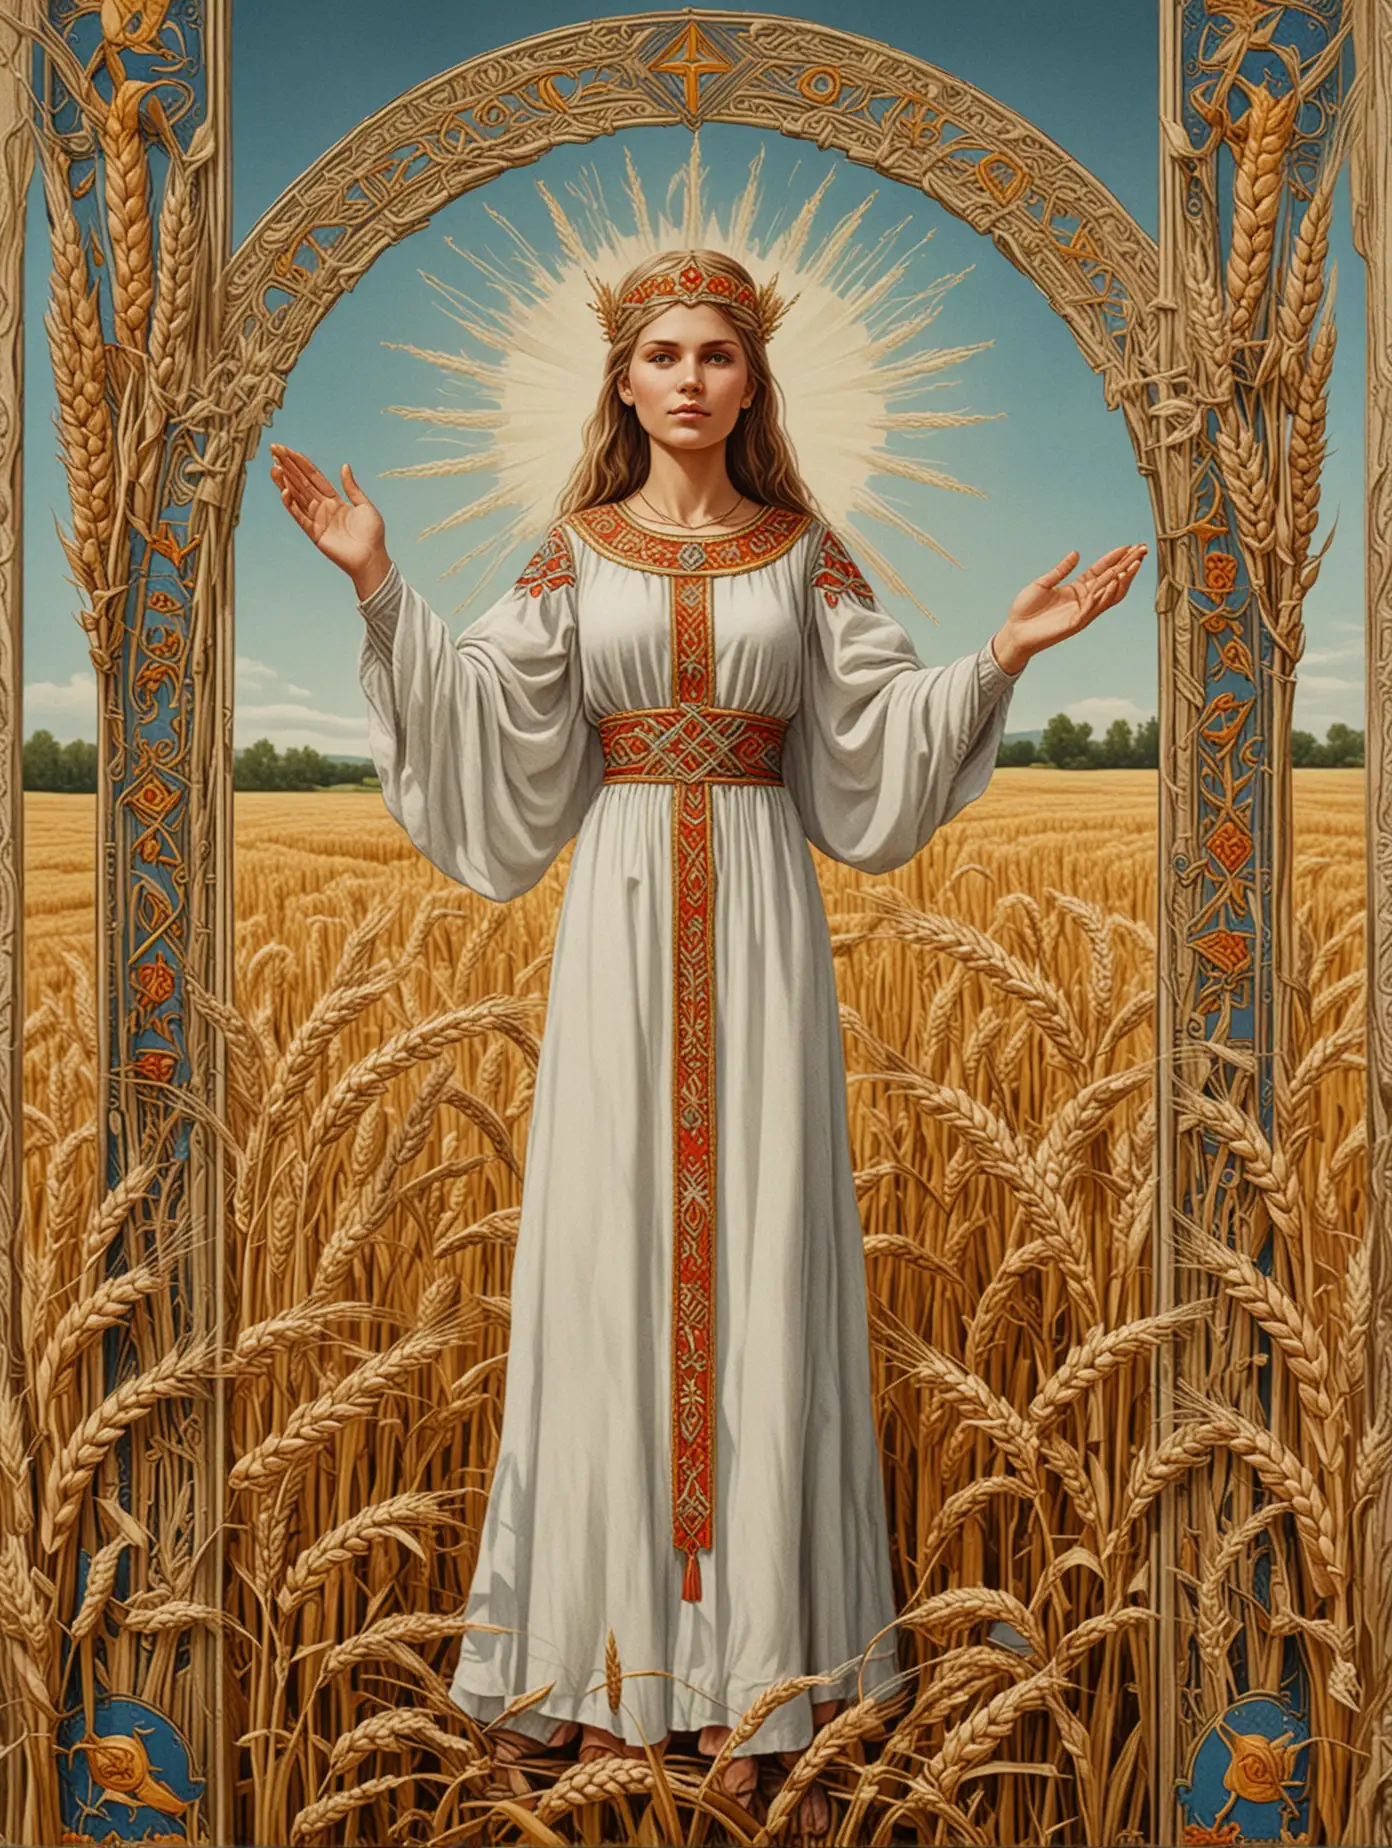 Slavic-Style-Tarot-Card-Woman-in-Wheat-Field-with-Raised-Hands-and-Ornate-Borders